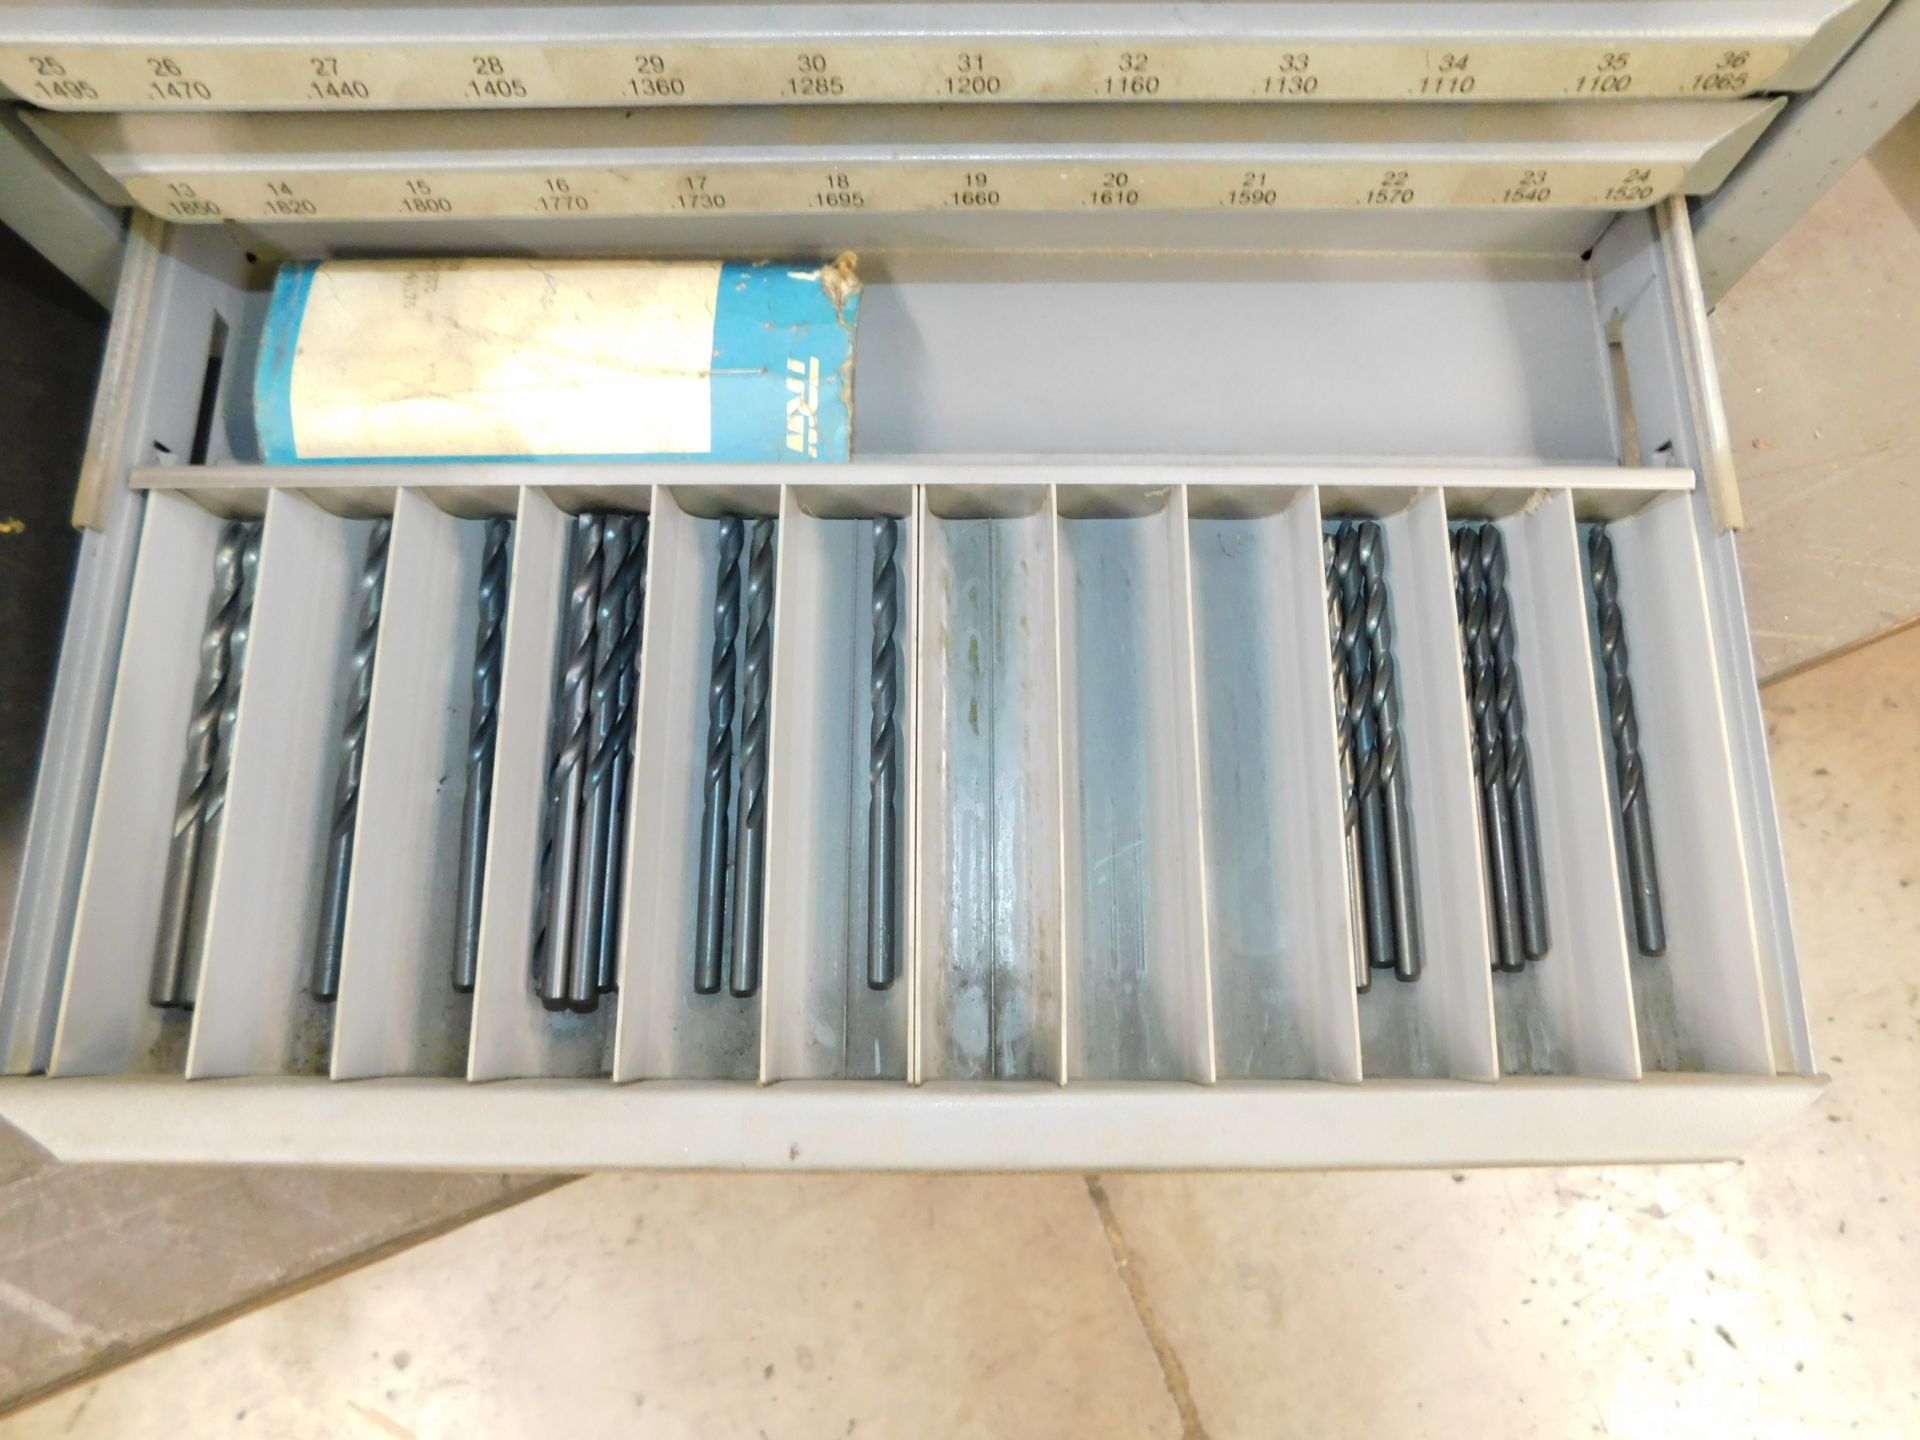 Drill Bit Cabinet with Number Drill Bits - Image 6 of 6